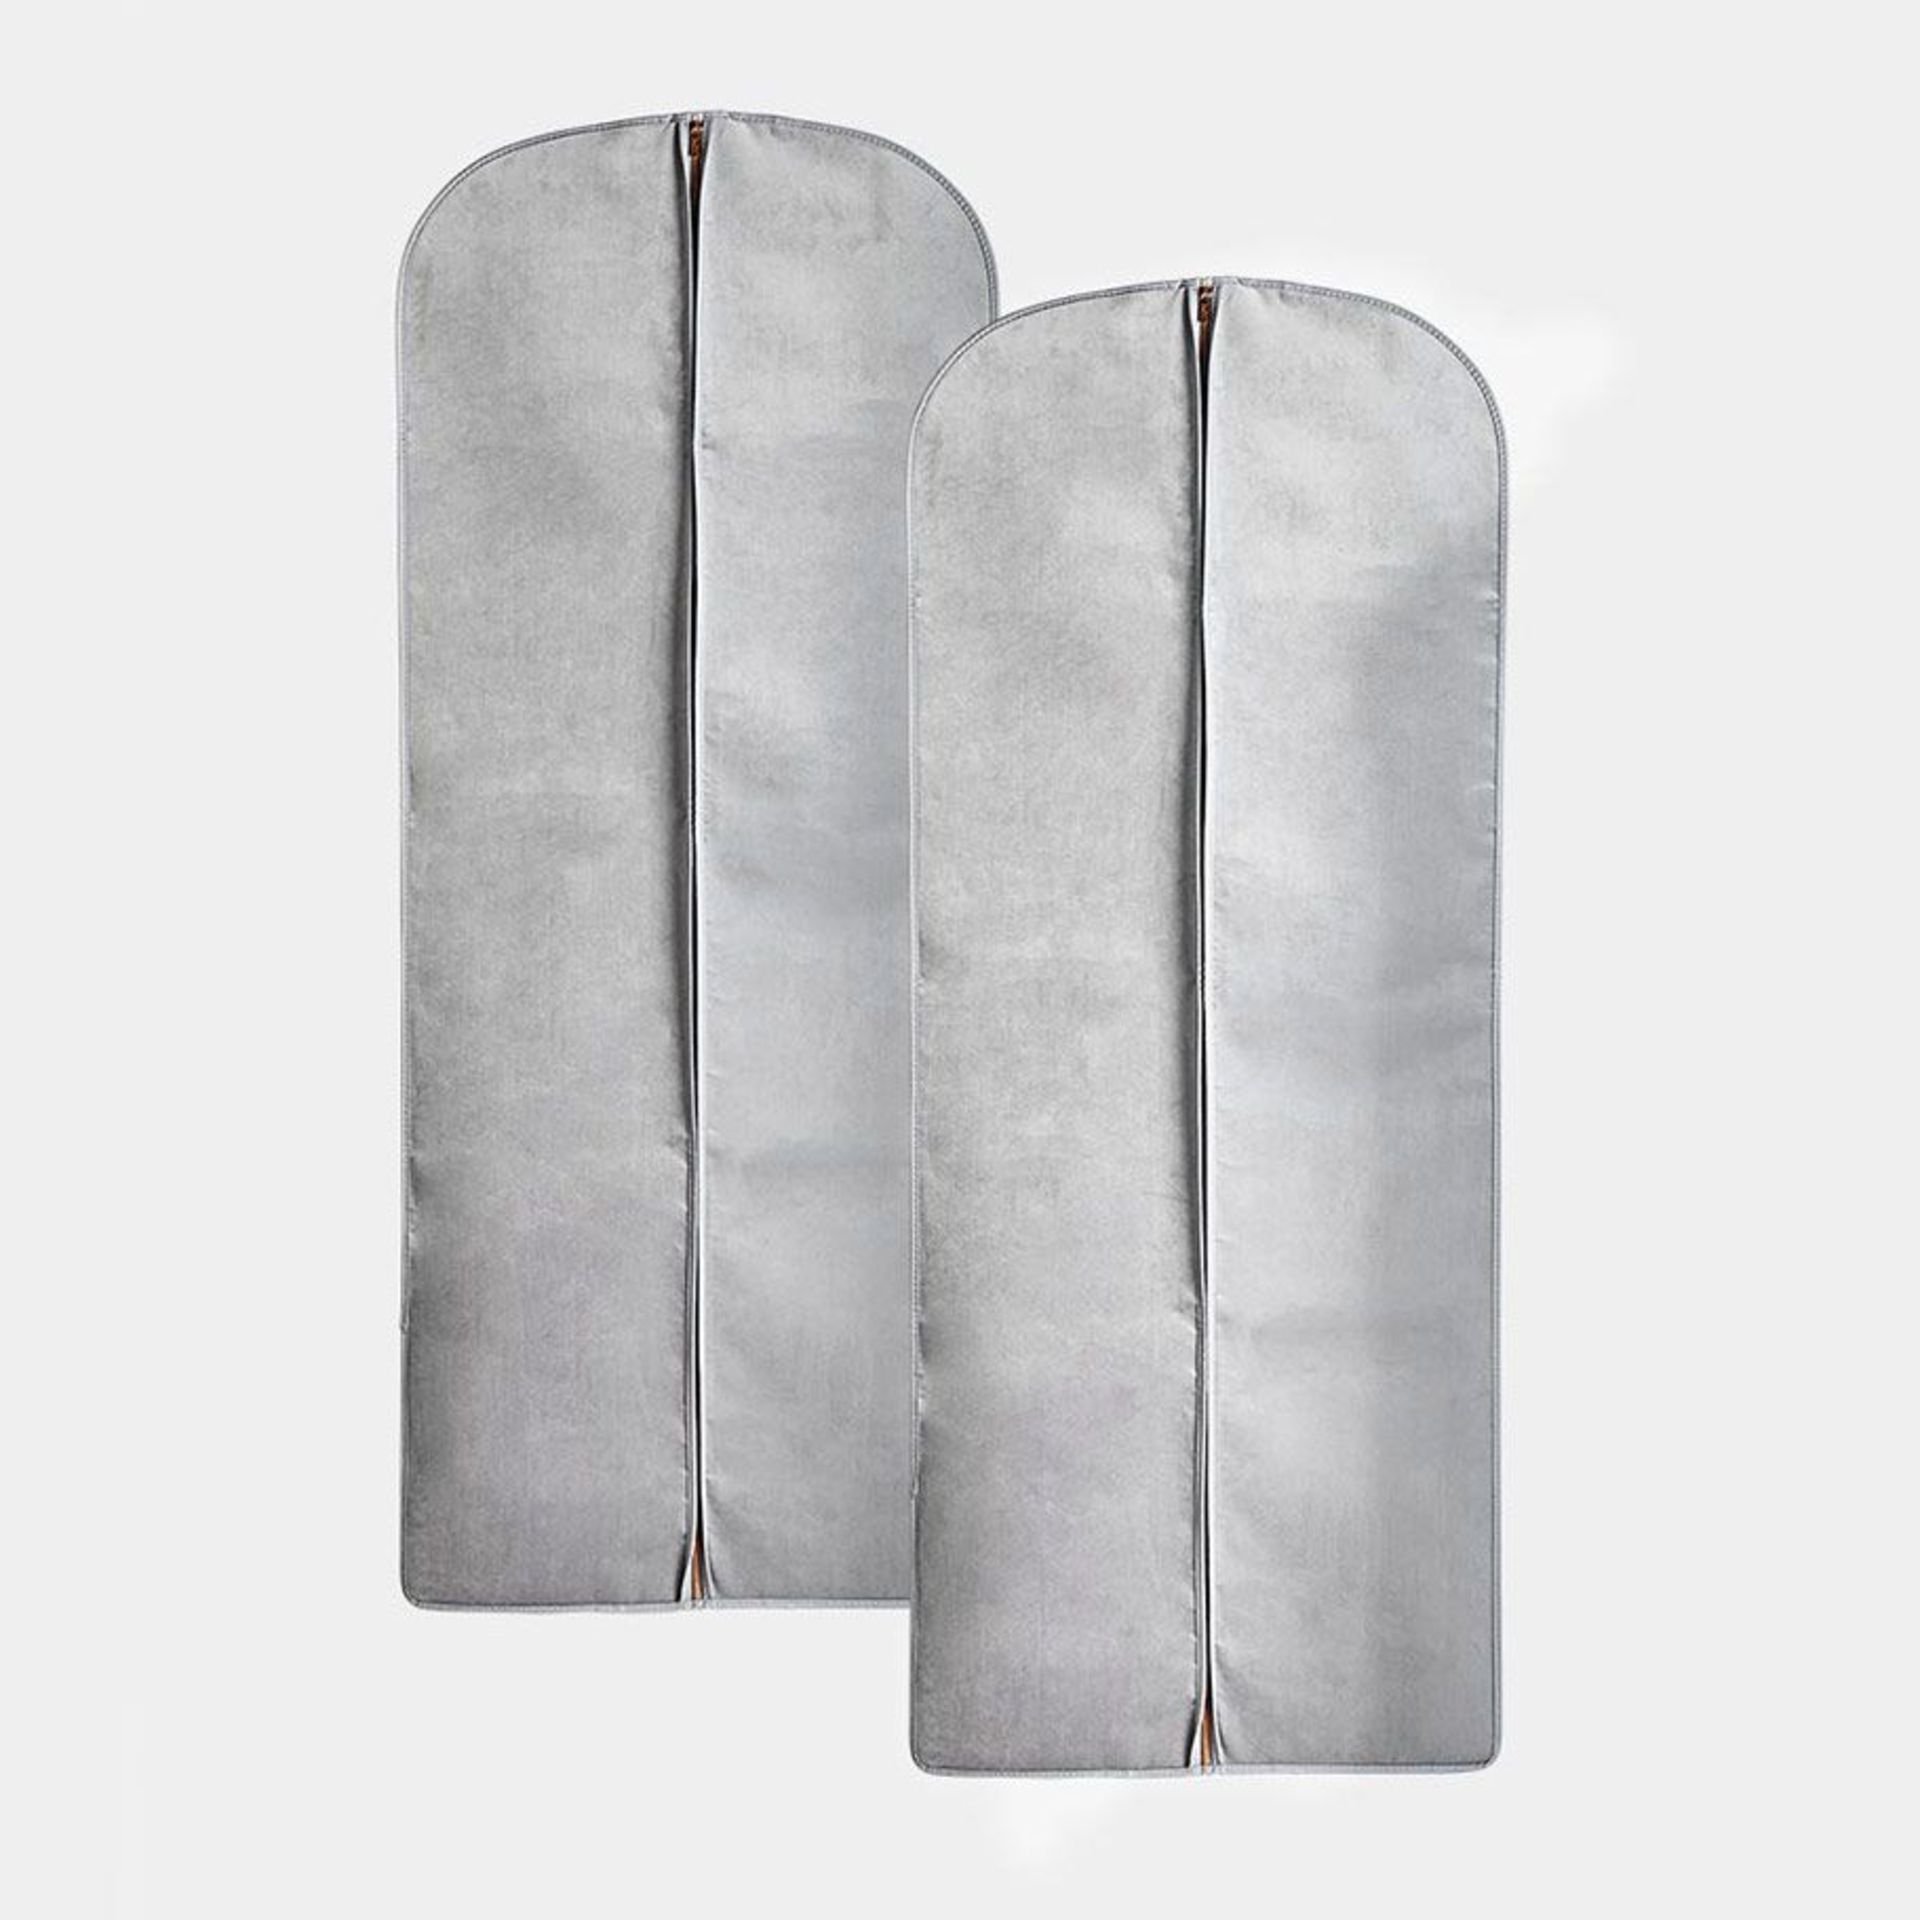 10 x New & Packaged Sets of Beautify Grey & Rose Gold Garment Bags. RRP £29.99 per set. (9200050). - Image 3 of 4